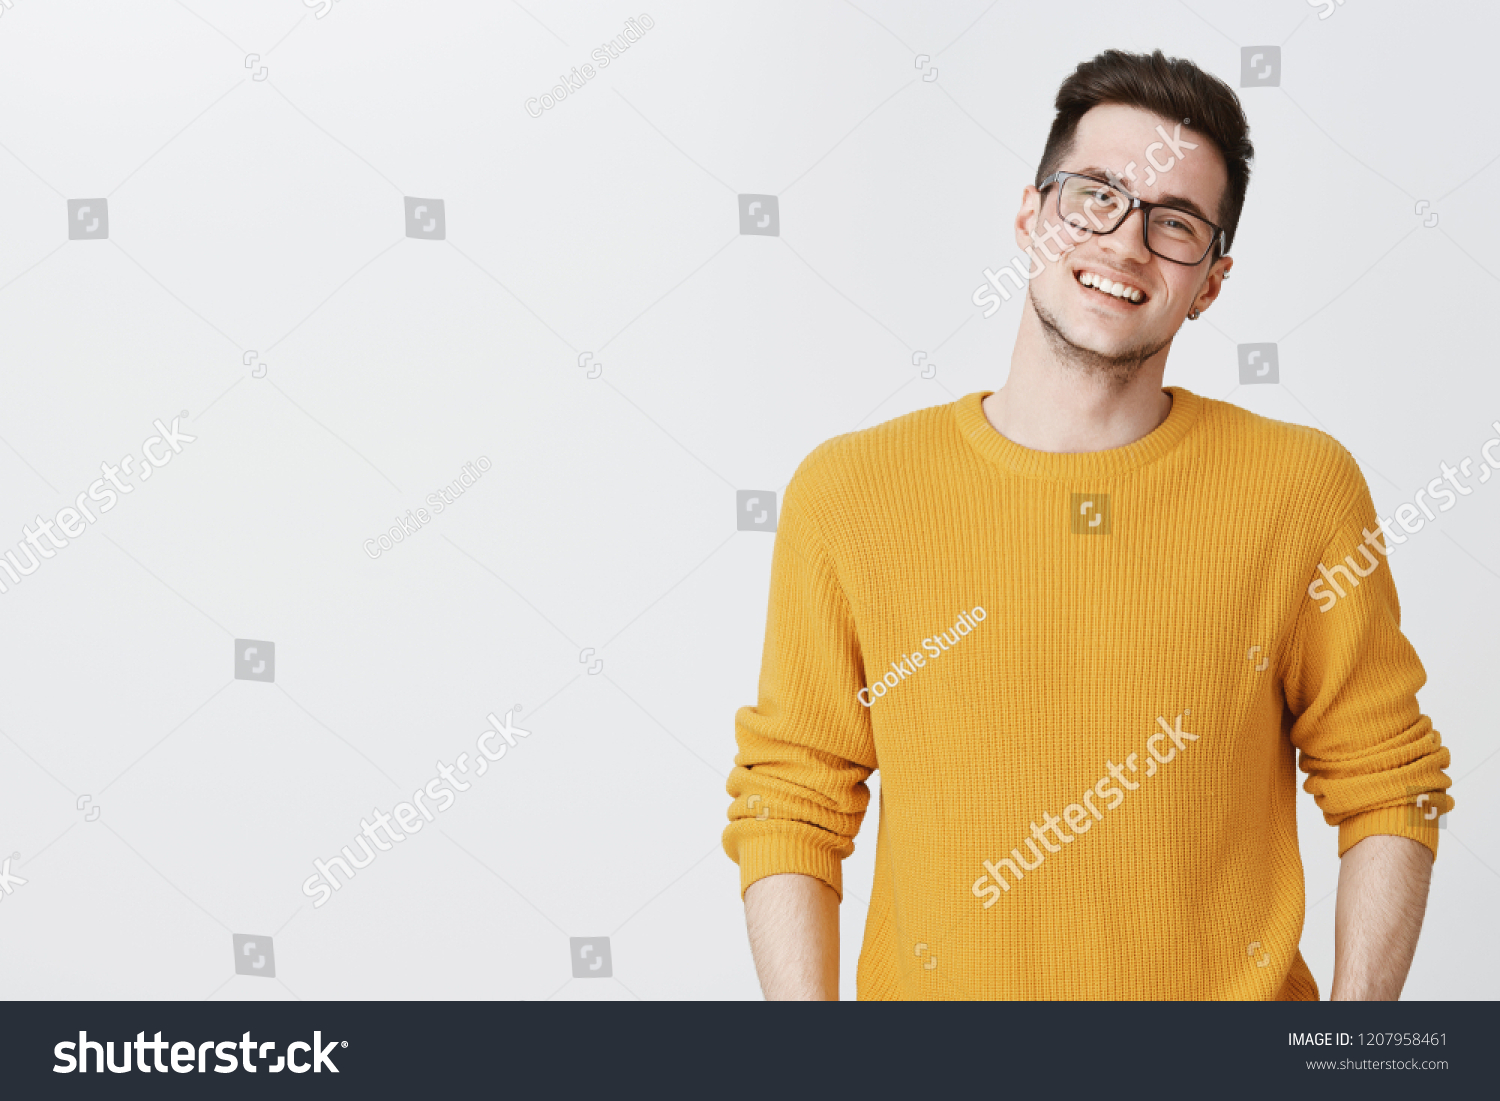 Waist-up shot of happy and delighted handsome young man in glasses and yellow sweater tilting head, smiling and laughing as looking friendly at camera on right side of copy space over gray background #1207958461